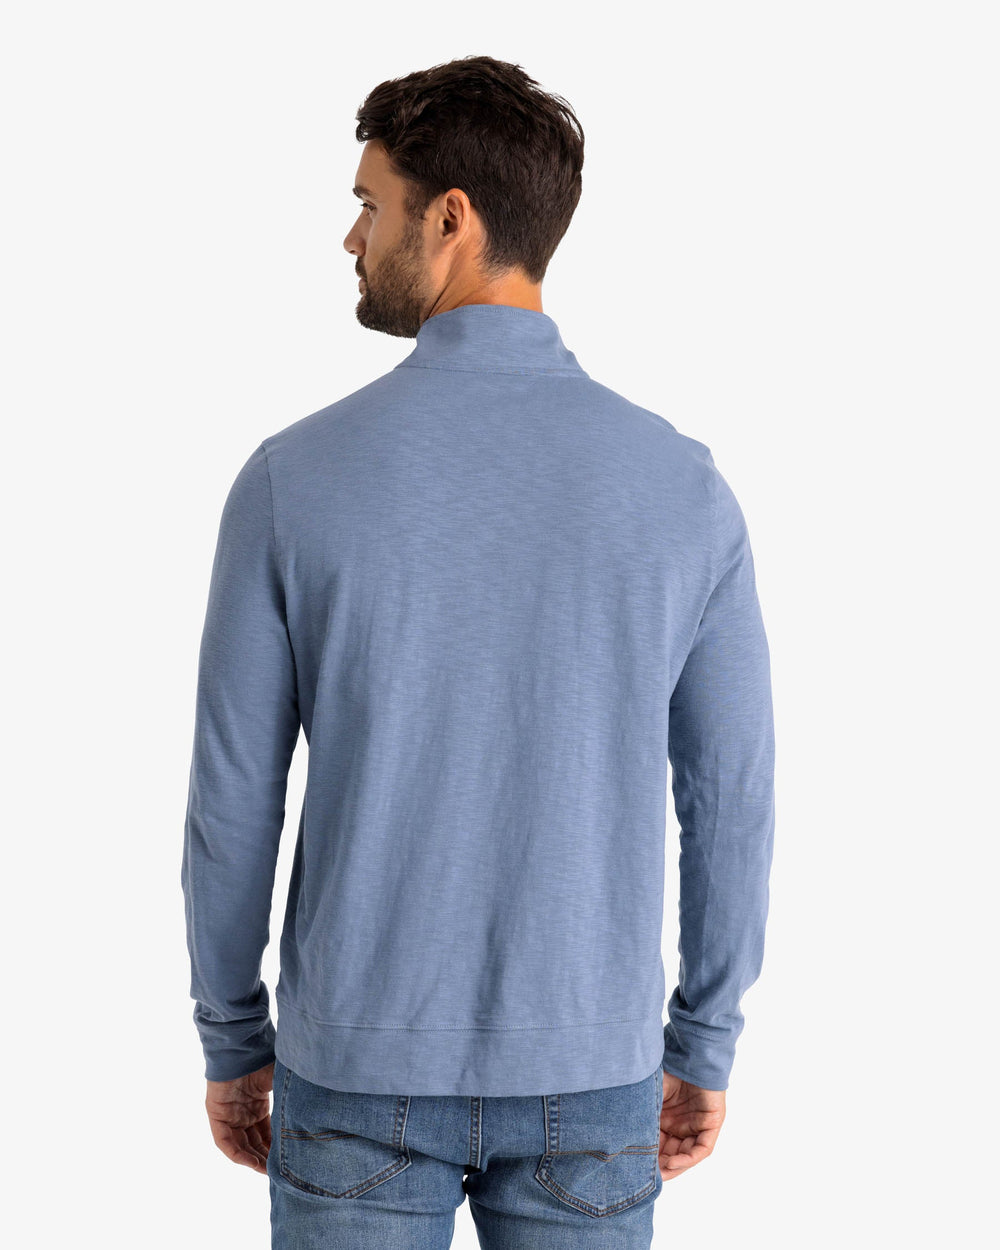 The back view of the Sun Farer Ocean View Quarter Button Pullover by Southern Tide - Blue Haze